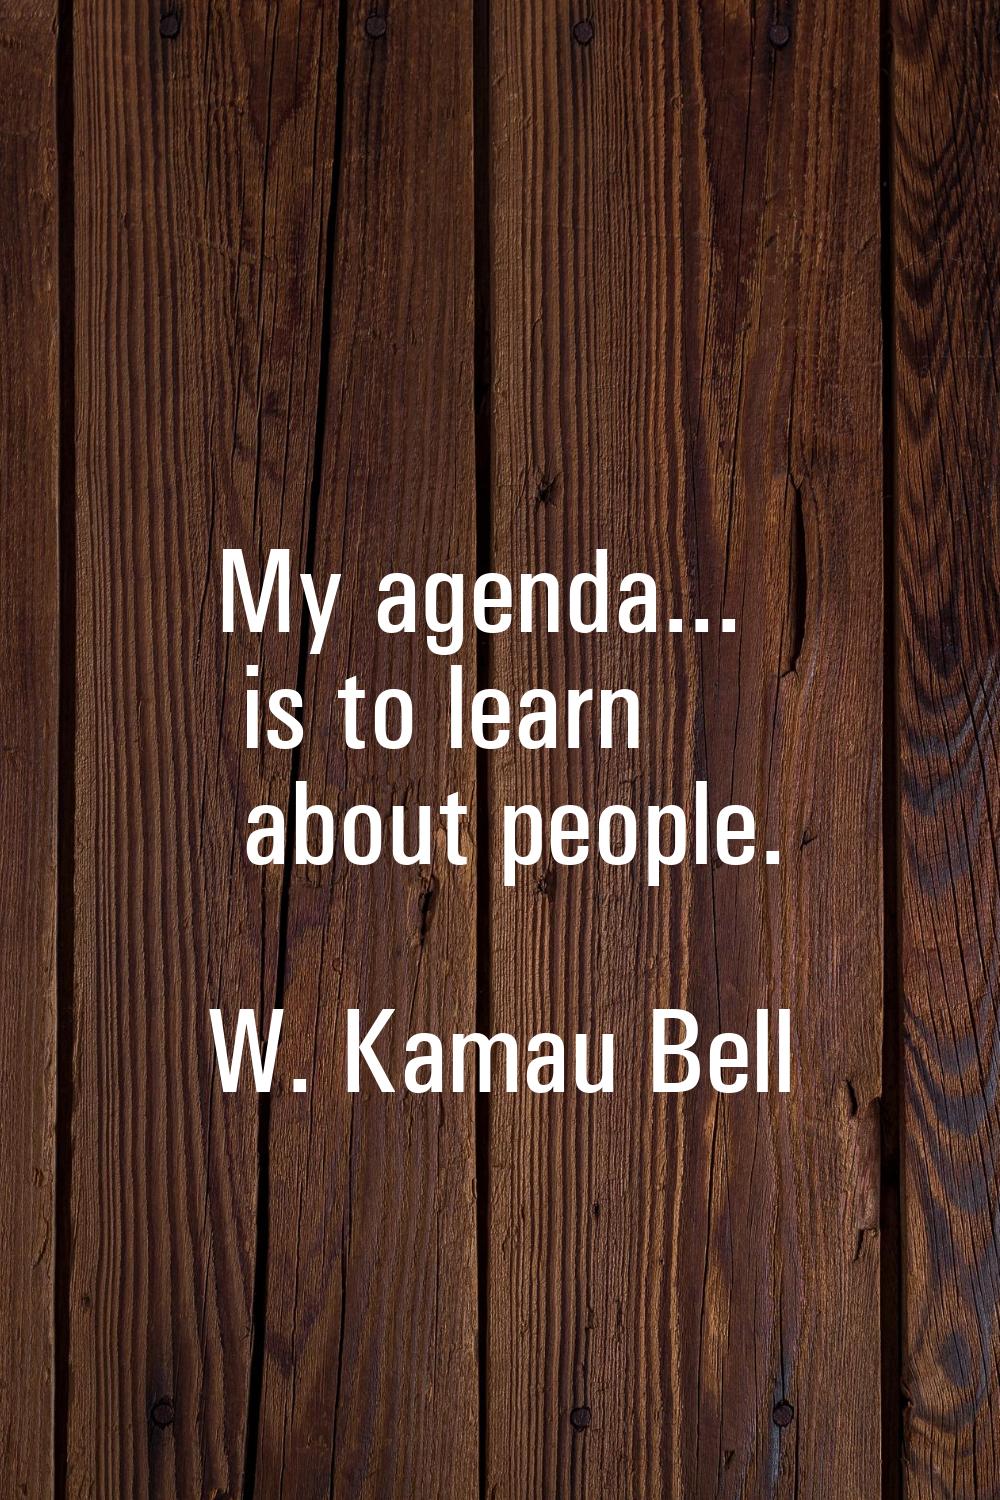 My agenda... is to learn about people.